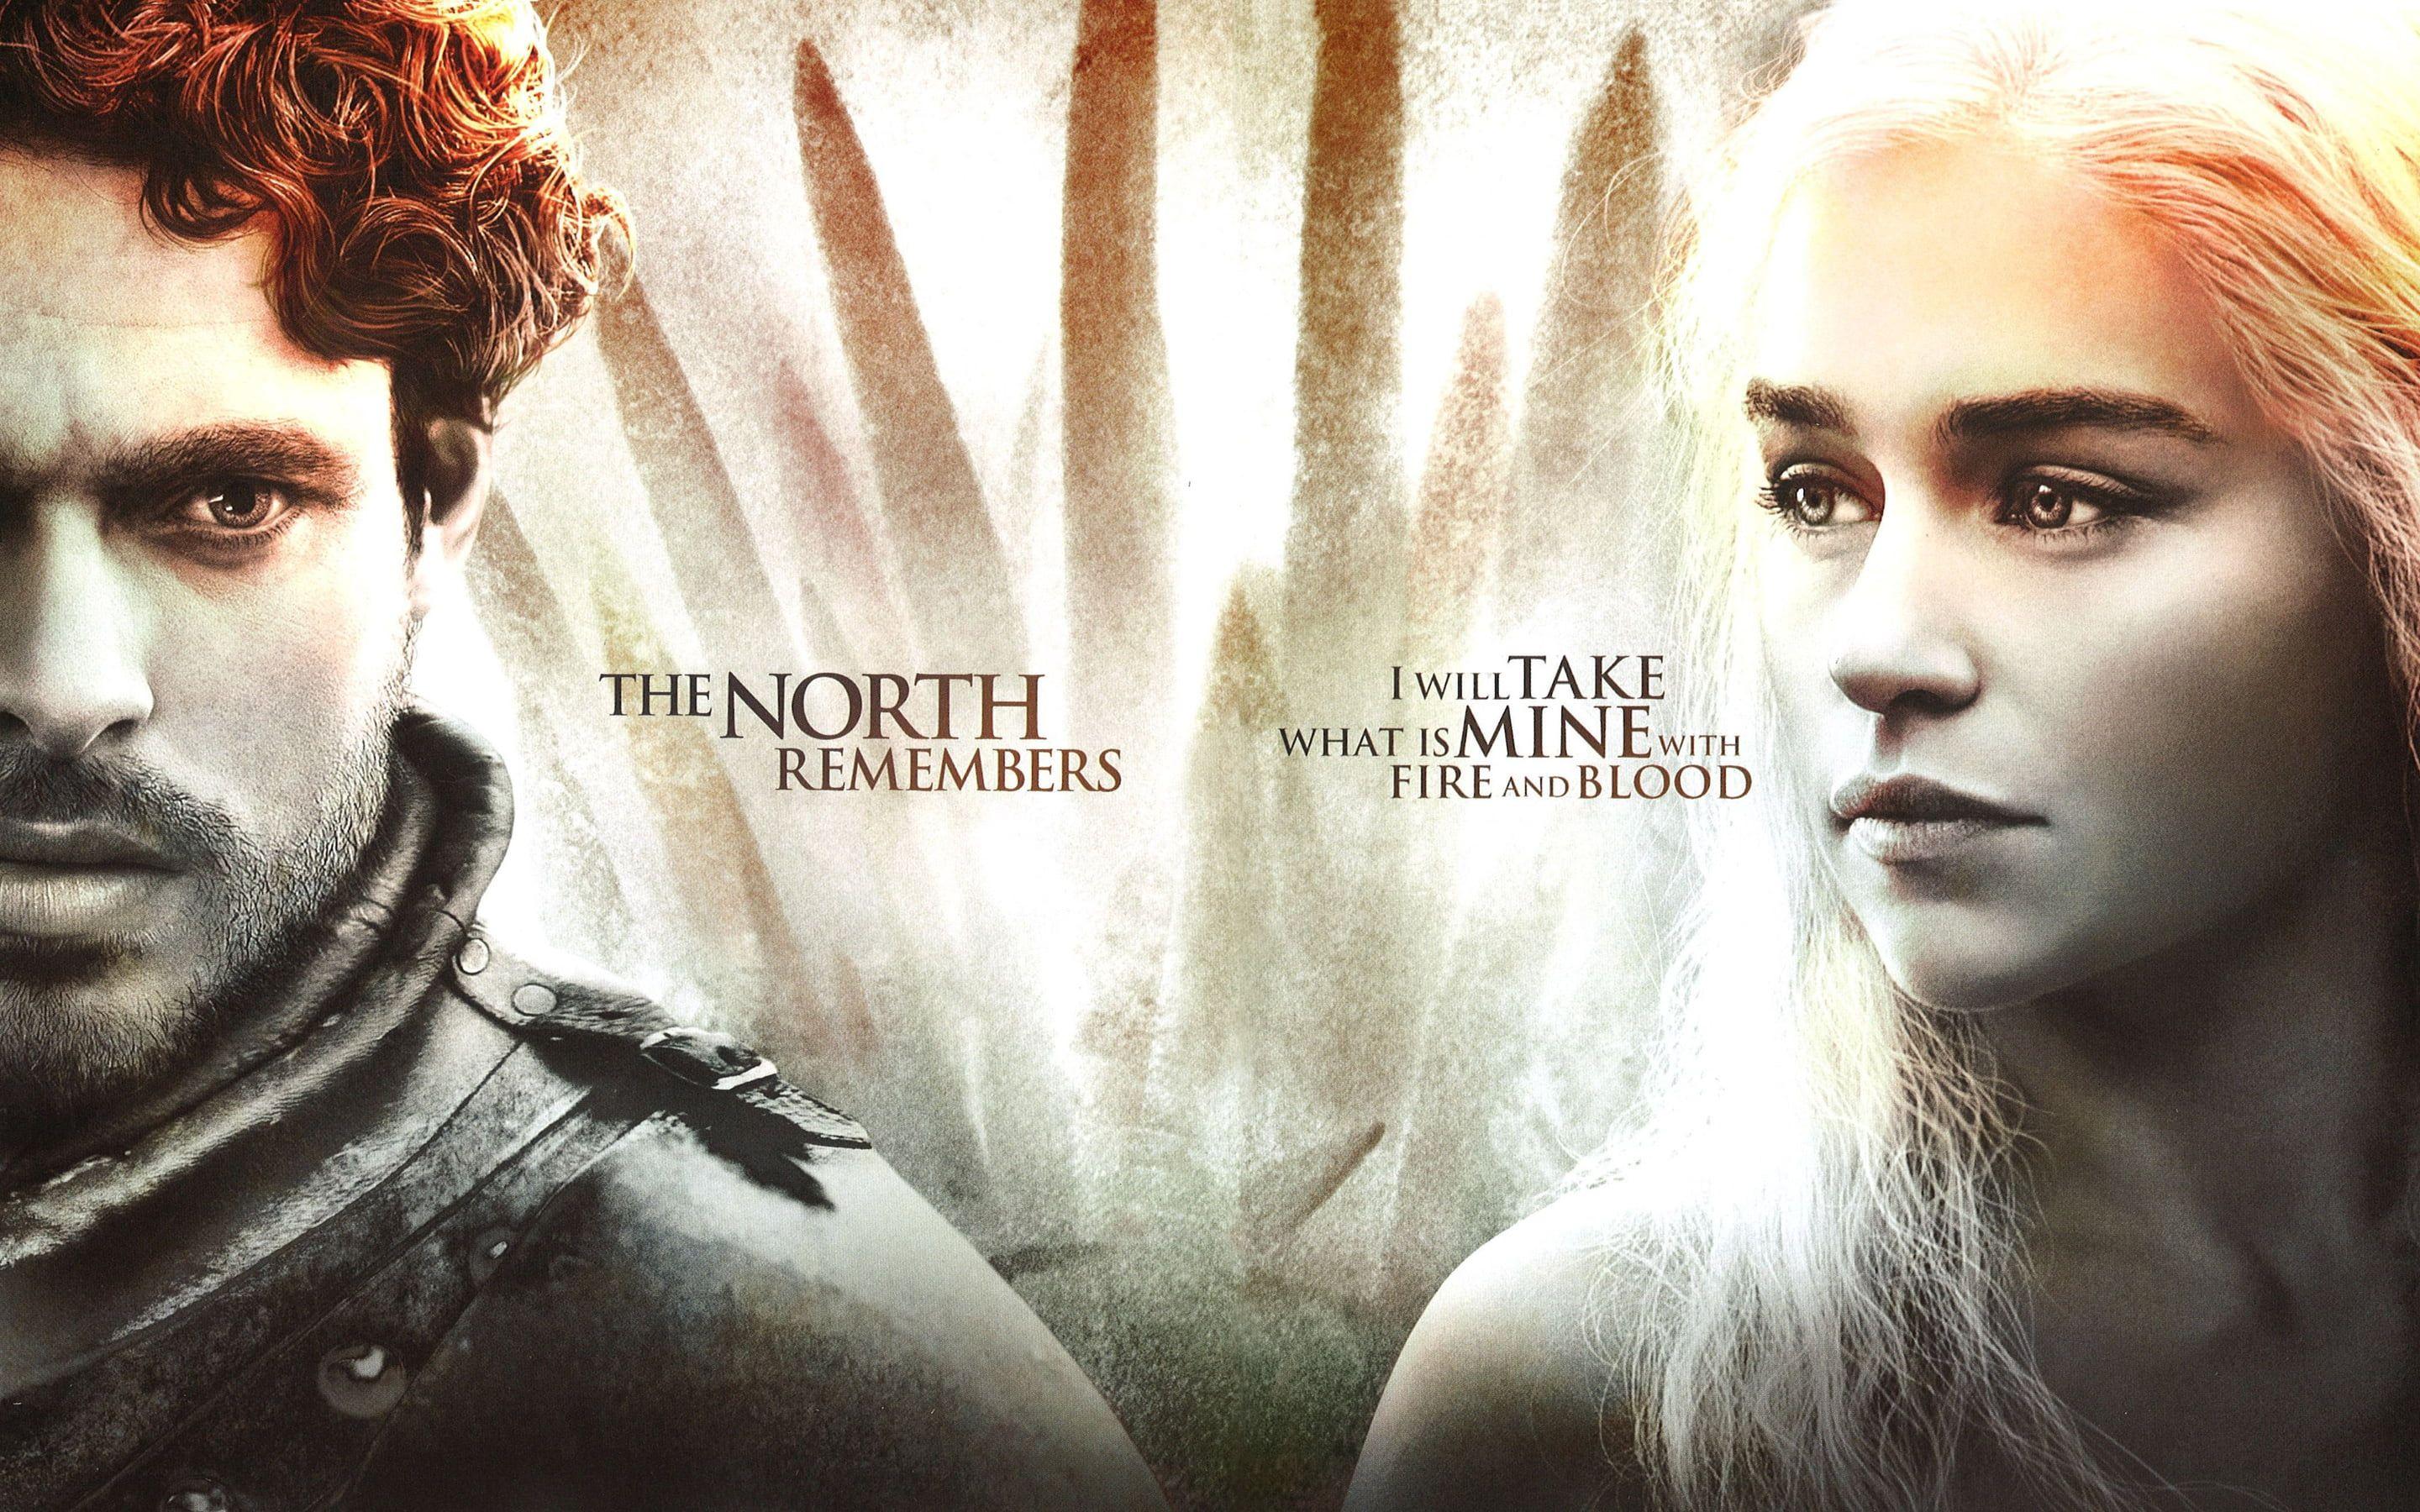 The North Remembers game of thrones HD wallpaper. Wallpaper